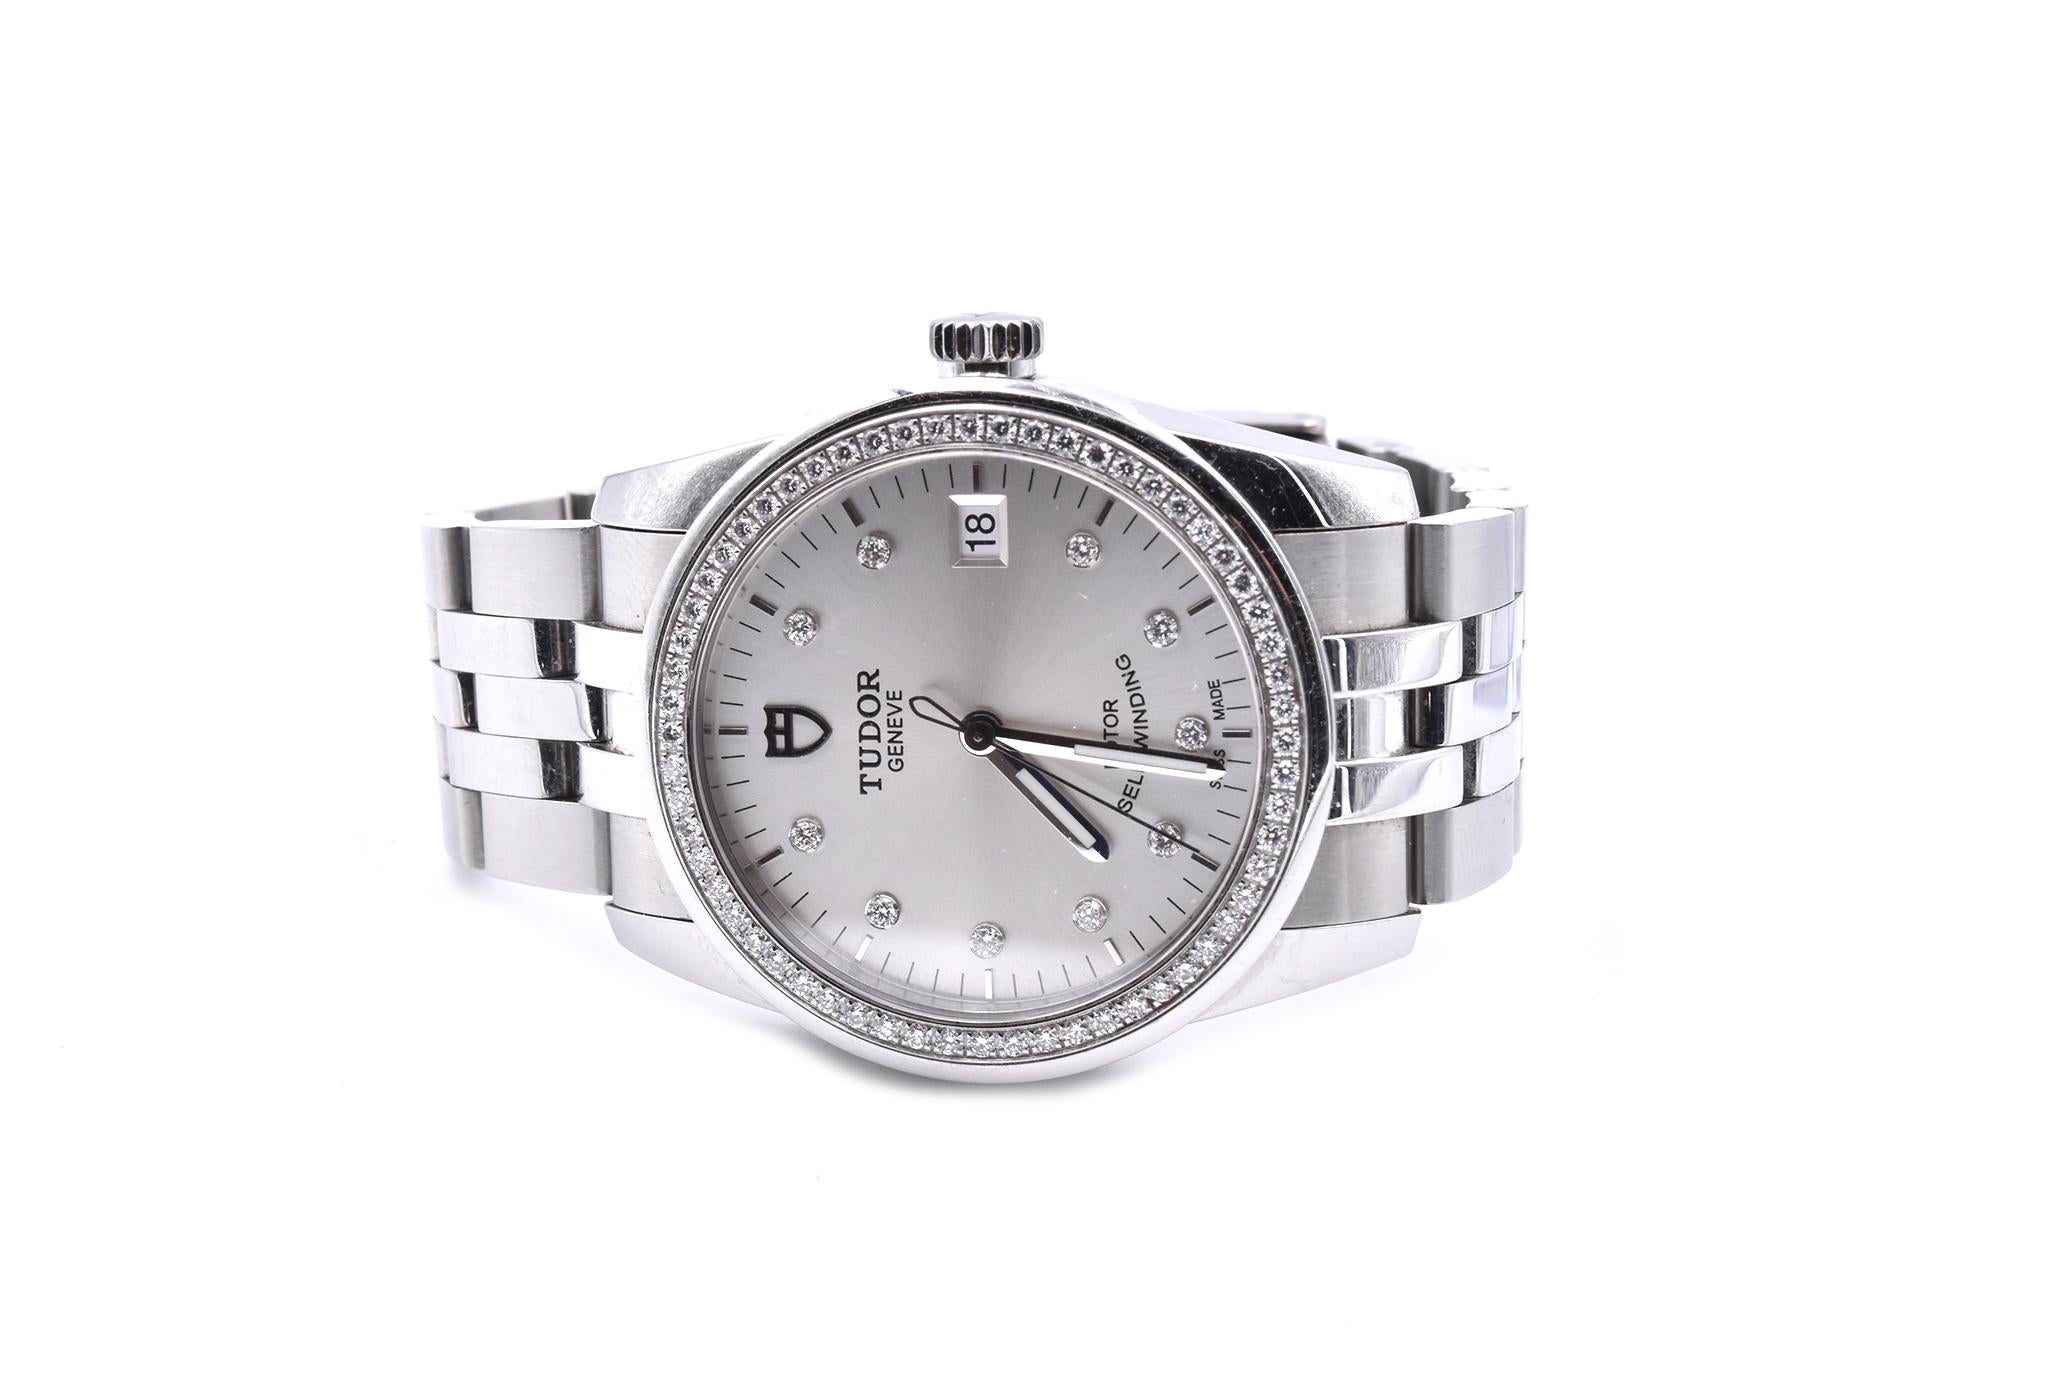 Movement: automatic
Function: hours, minutes, seconds, date
Case: round 36mm stainless steel case with a diamond bezel, screw-down crown, sapphire protective crystal
Dial: silver diamond dial, white luminescent hands,  silver sticks
Band: stainless